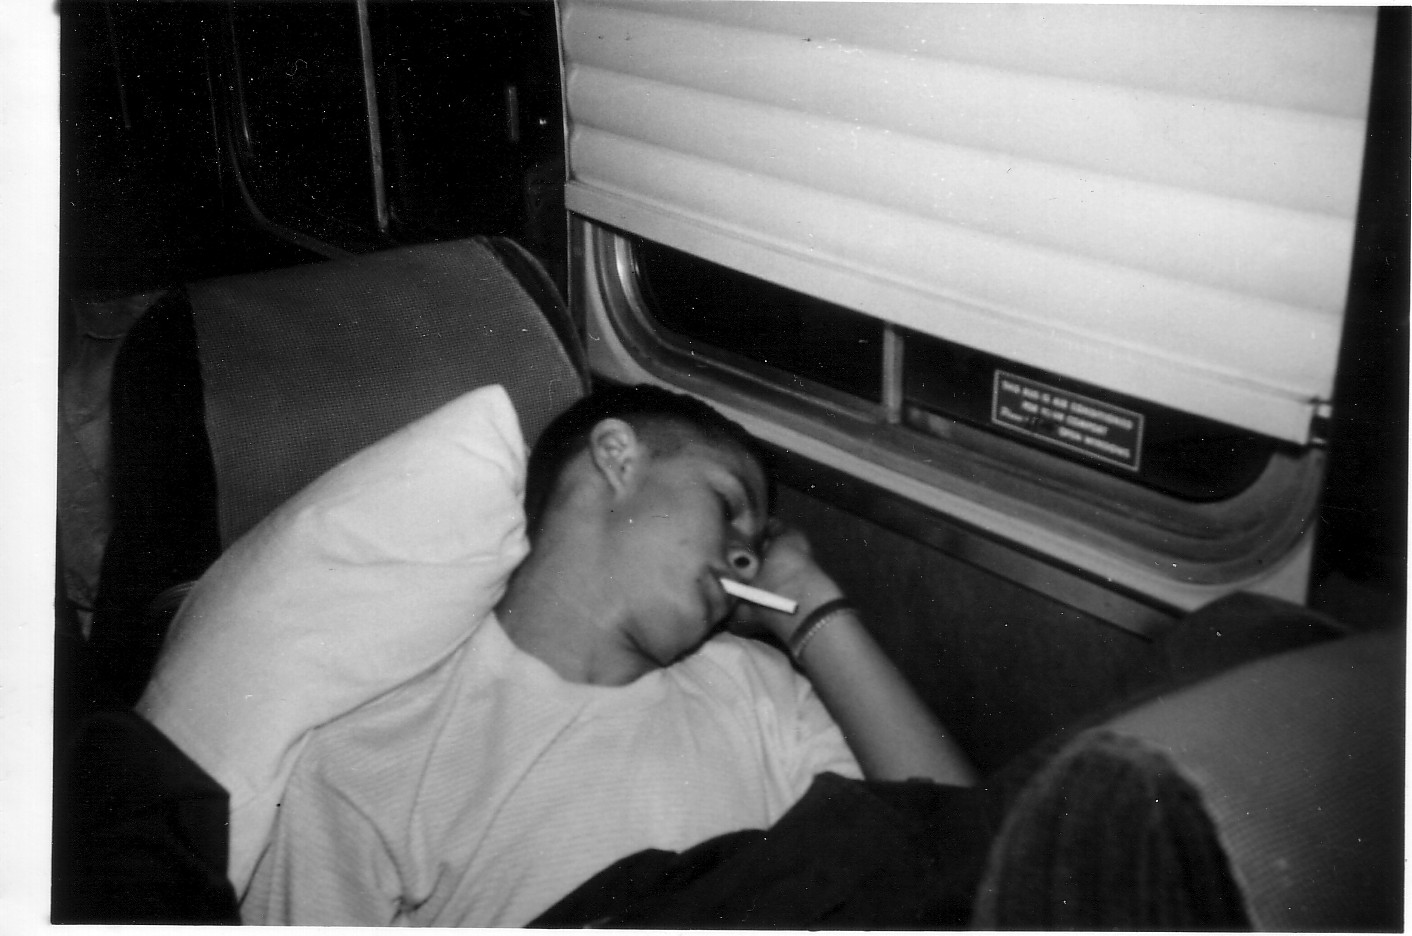 PHIL RENFROE ASLEEP.  I'M SURE THAT CIGARETTE WAS PLANTED.